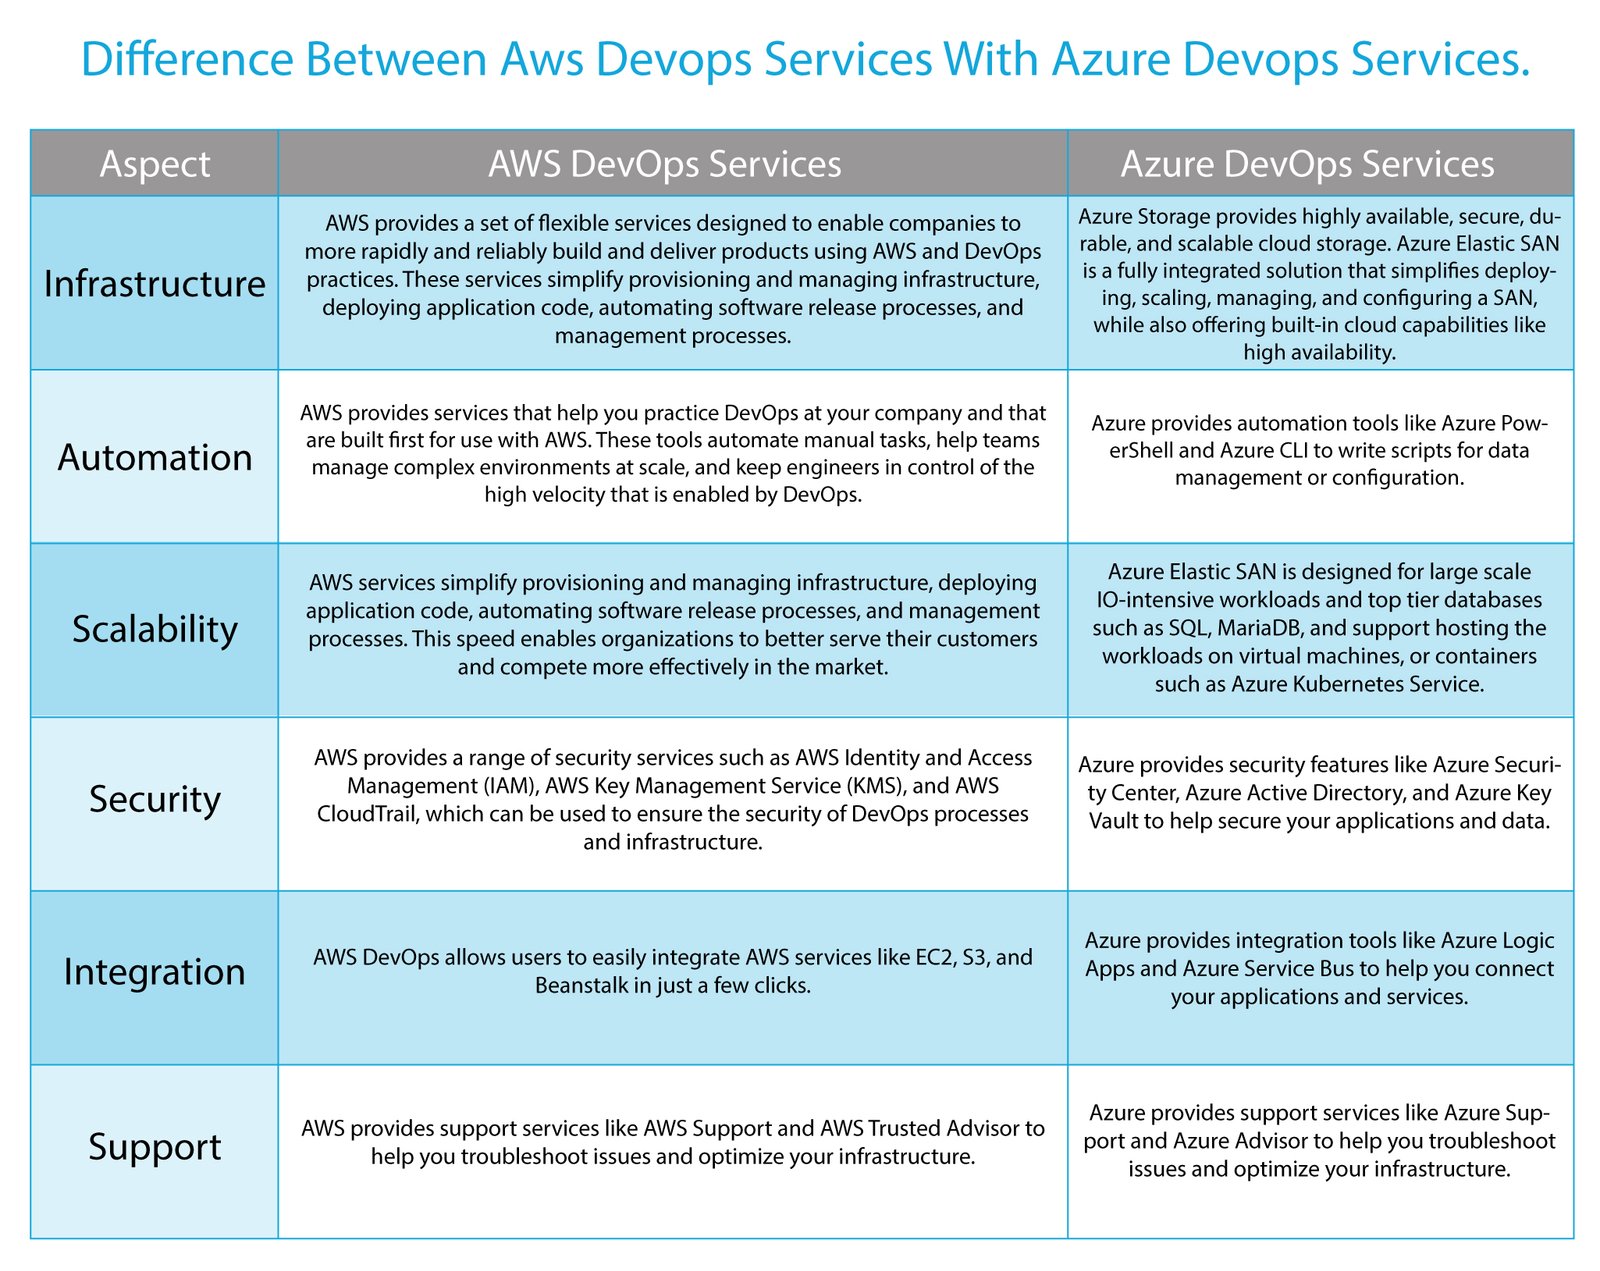 Difference Between AWS DevOps Services with Azure DevOps Services